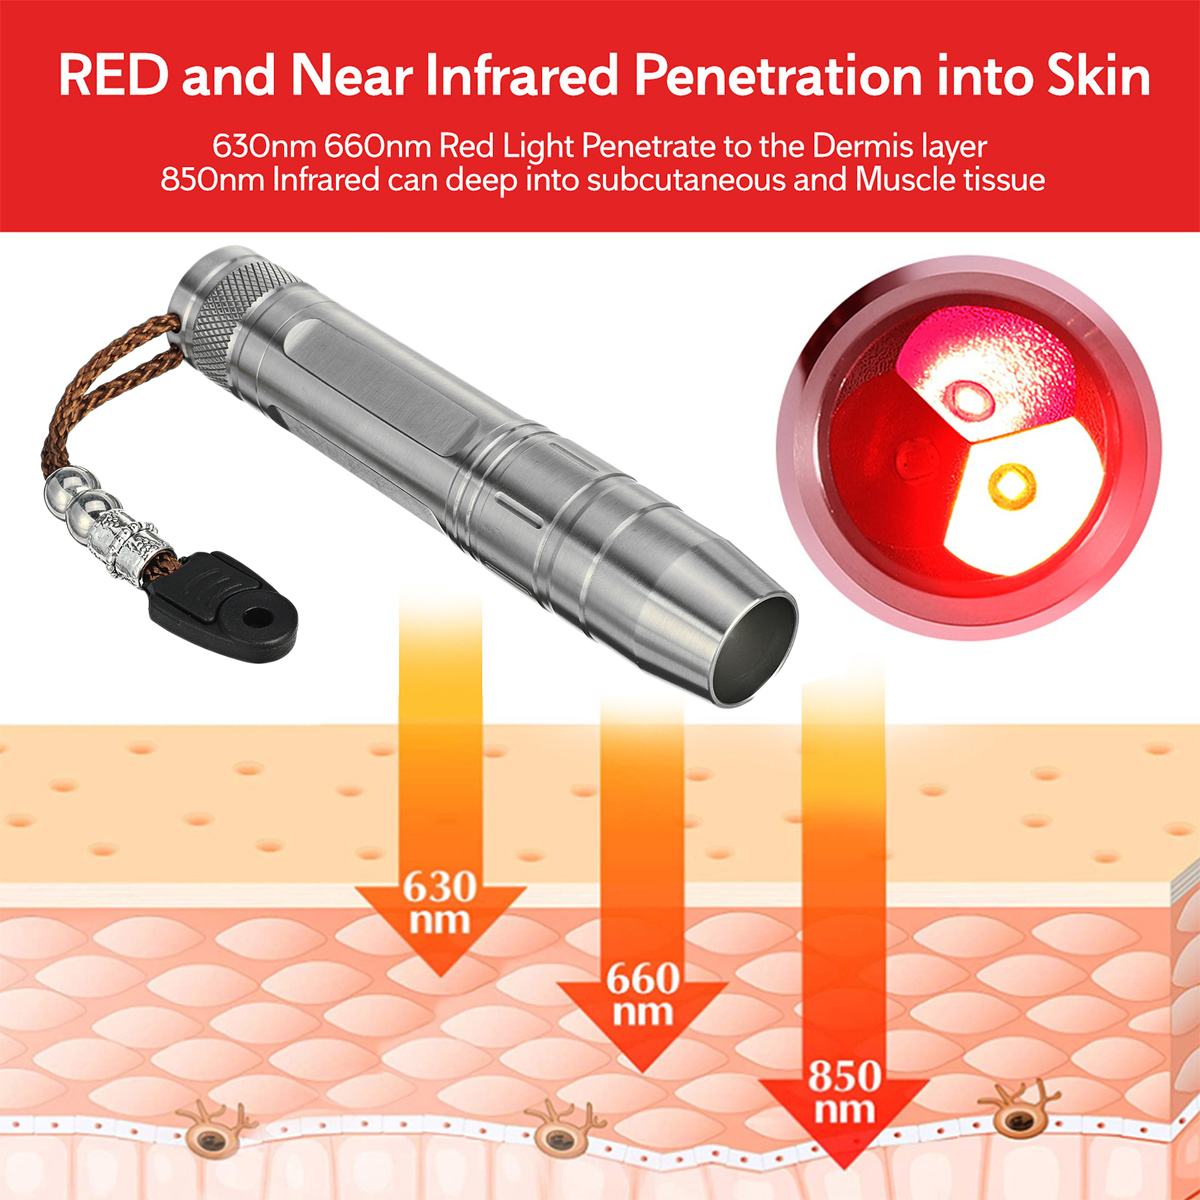 Portable-Home-Use-LED-Face-Light-Therapy-630nm-660nm-Red-Light-Combined-With-850nm-Infrared-Light-to-1934525-2